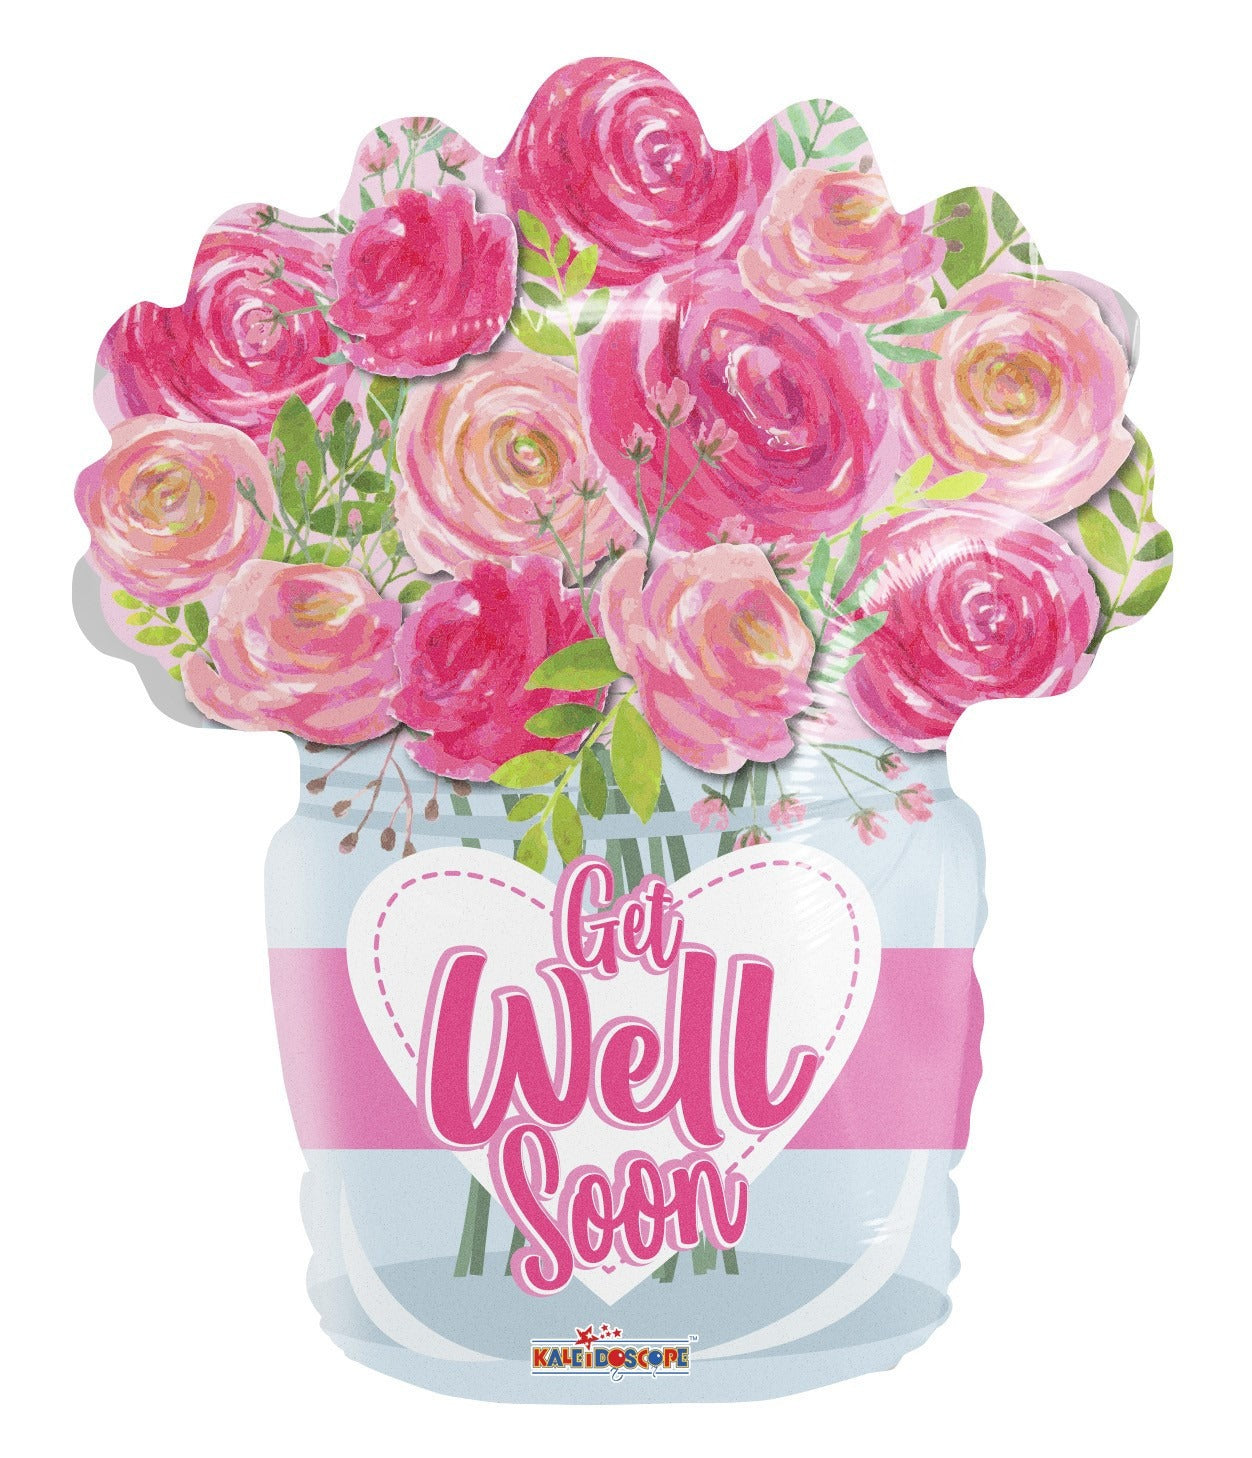 View Get Well Roses Balloon 18 inch information